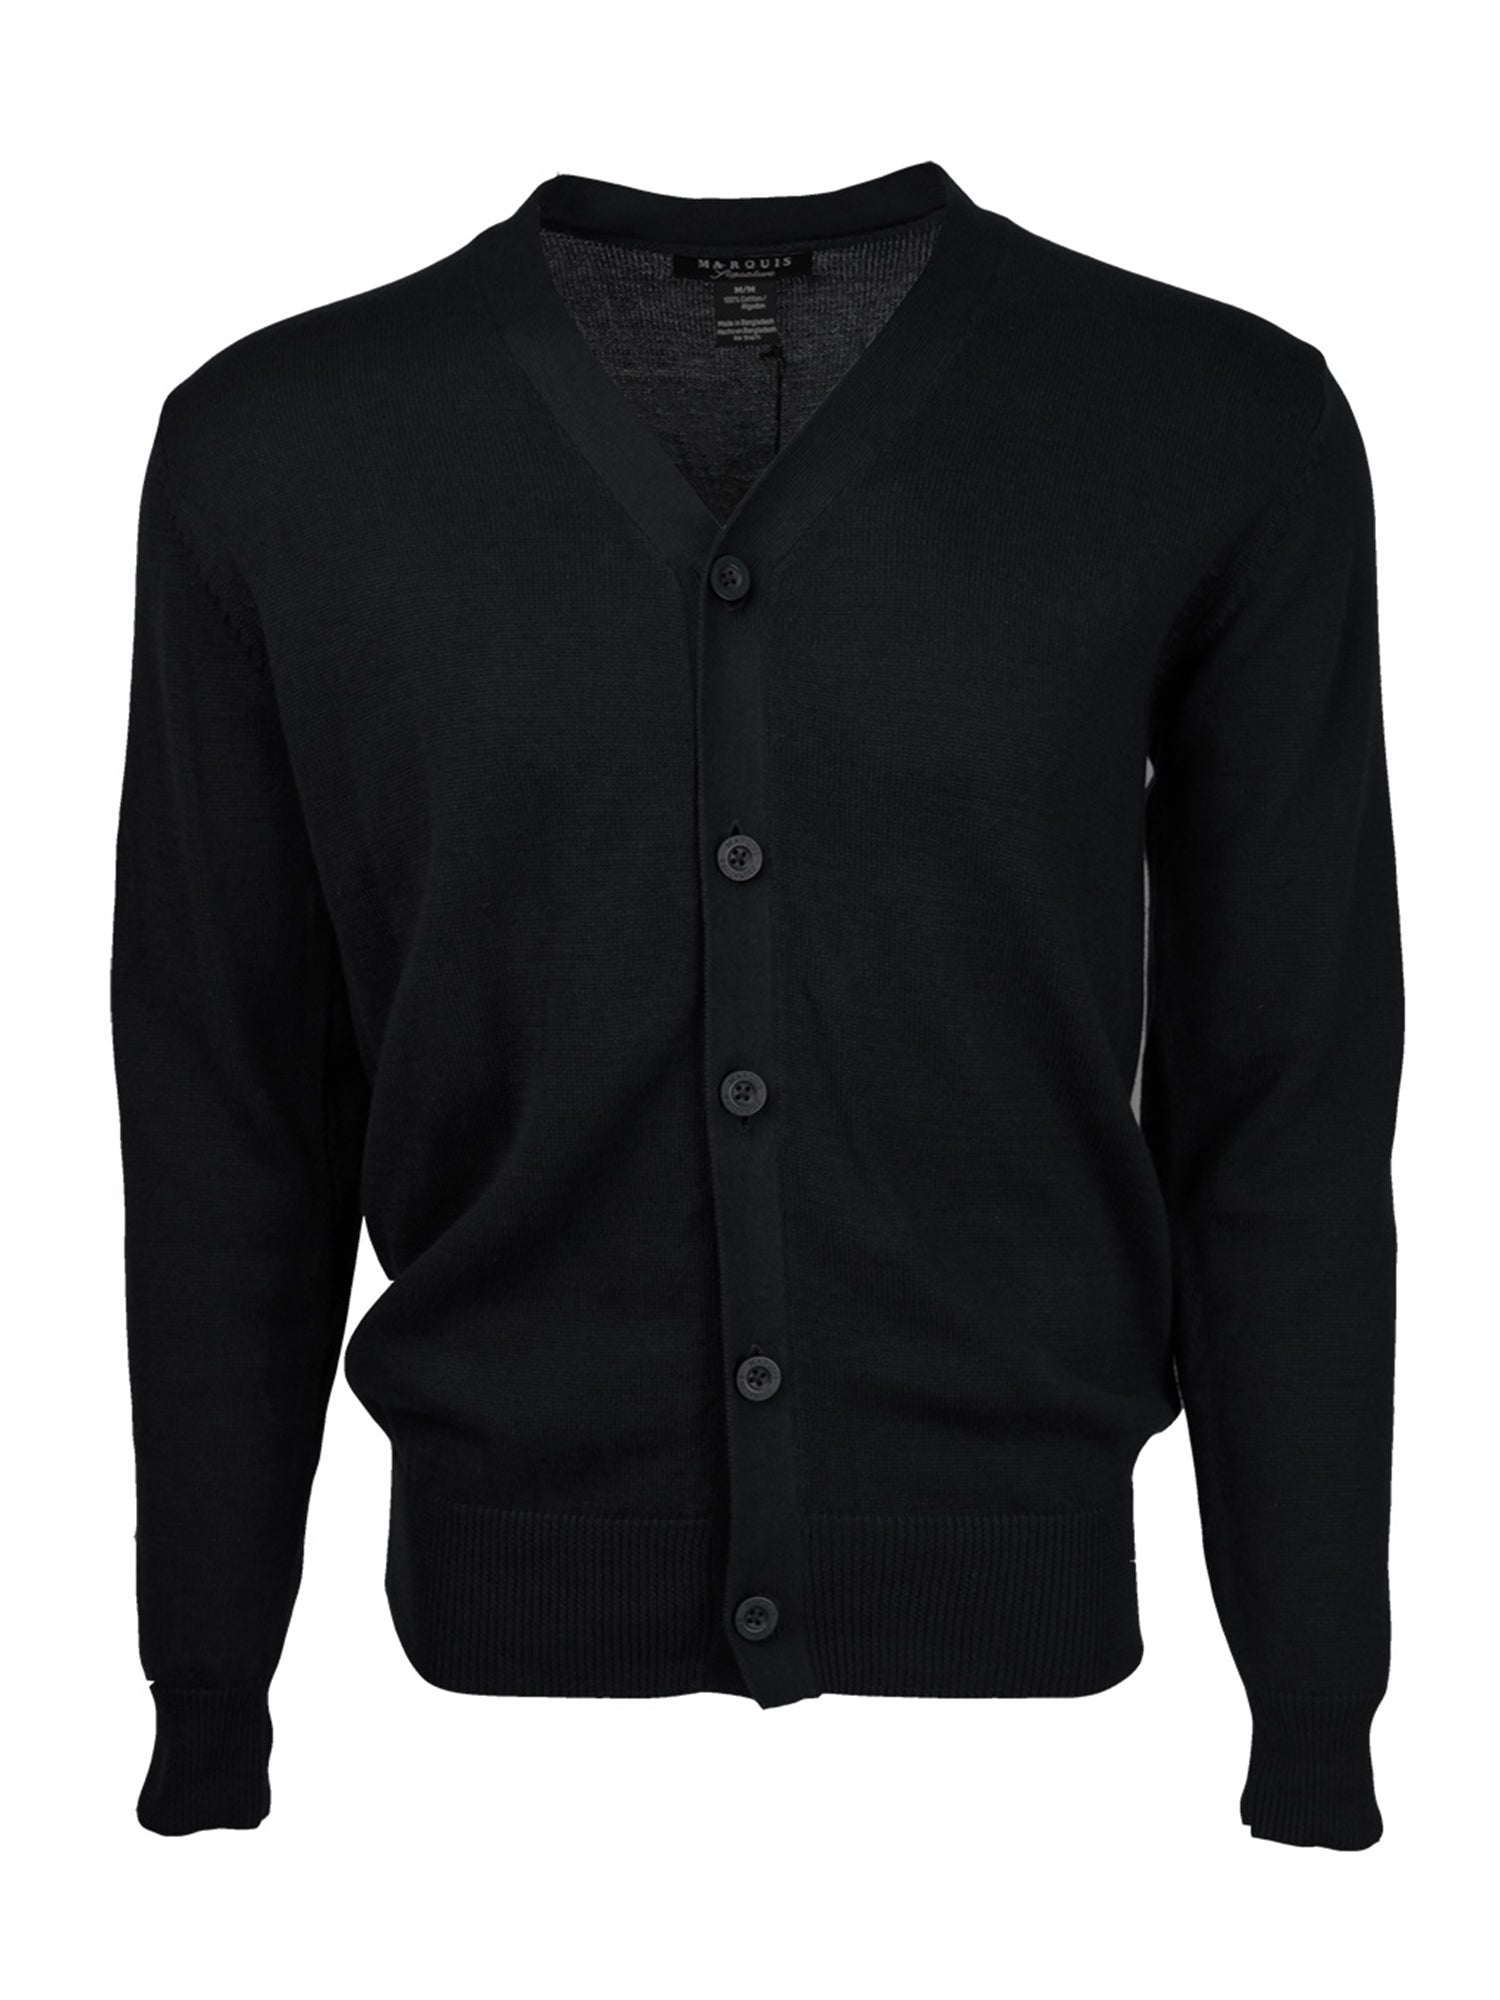 Solid Button Cotton Cardigan For Men From Marquis Sweater TheDapperTie Black Small 